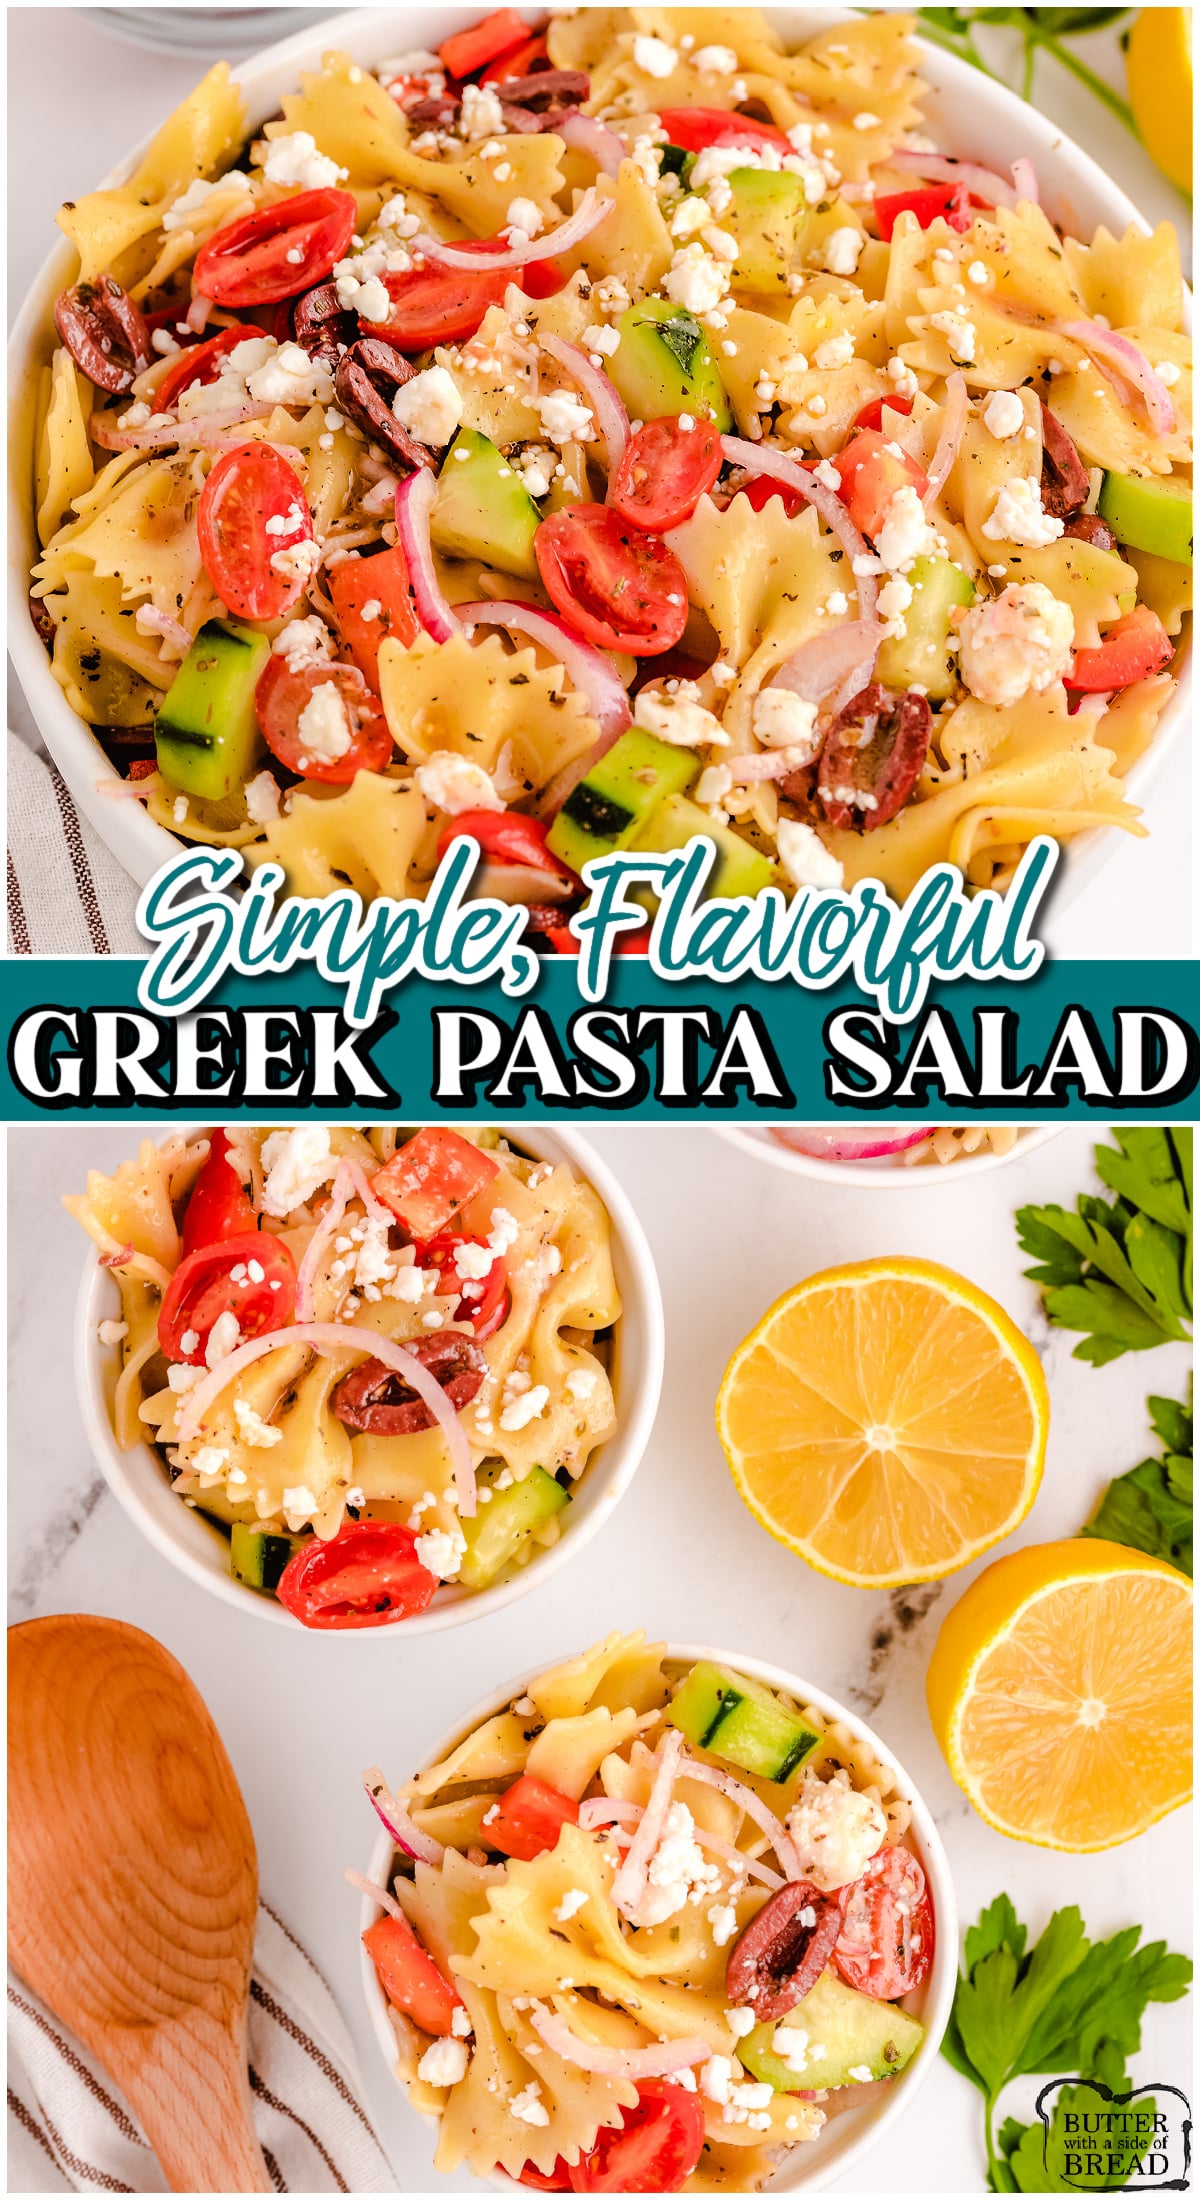 Greek Pasta Salad is loaded with vegetables & drizzled with an incredible homemade vinaigrette dressing! Fresh, flavorful pasta salad with delicious Greek seasonings that everyone enjoys!